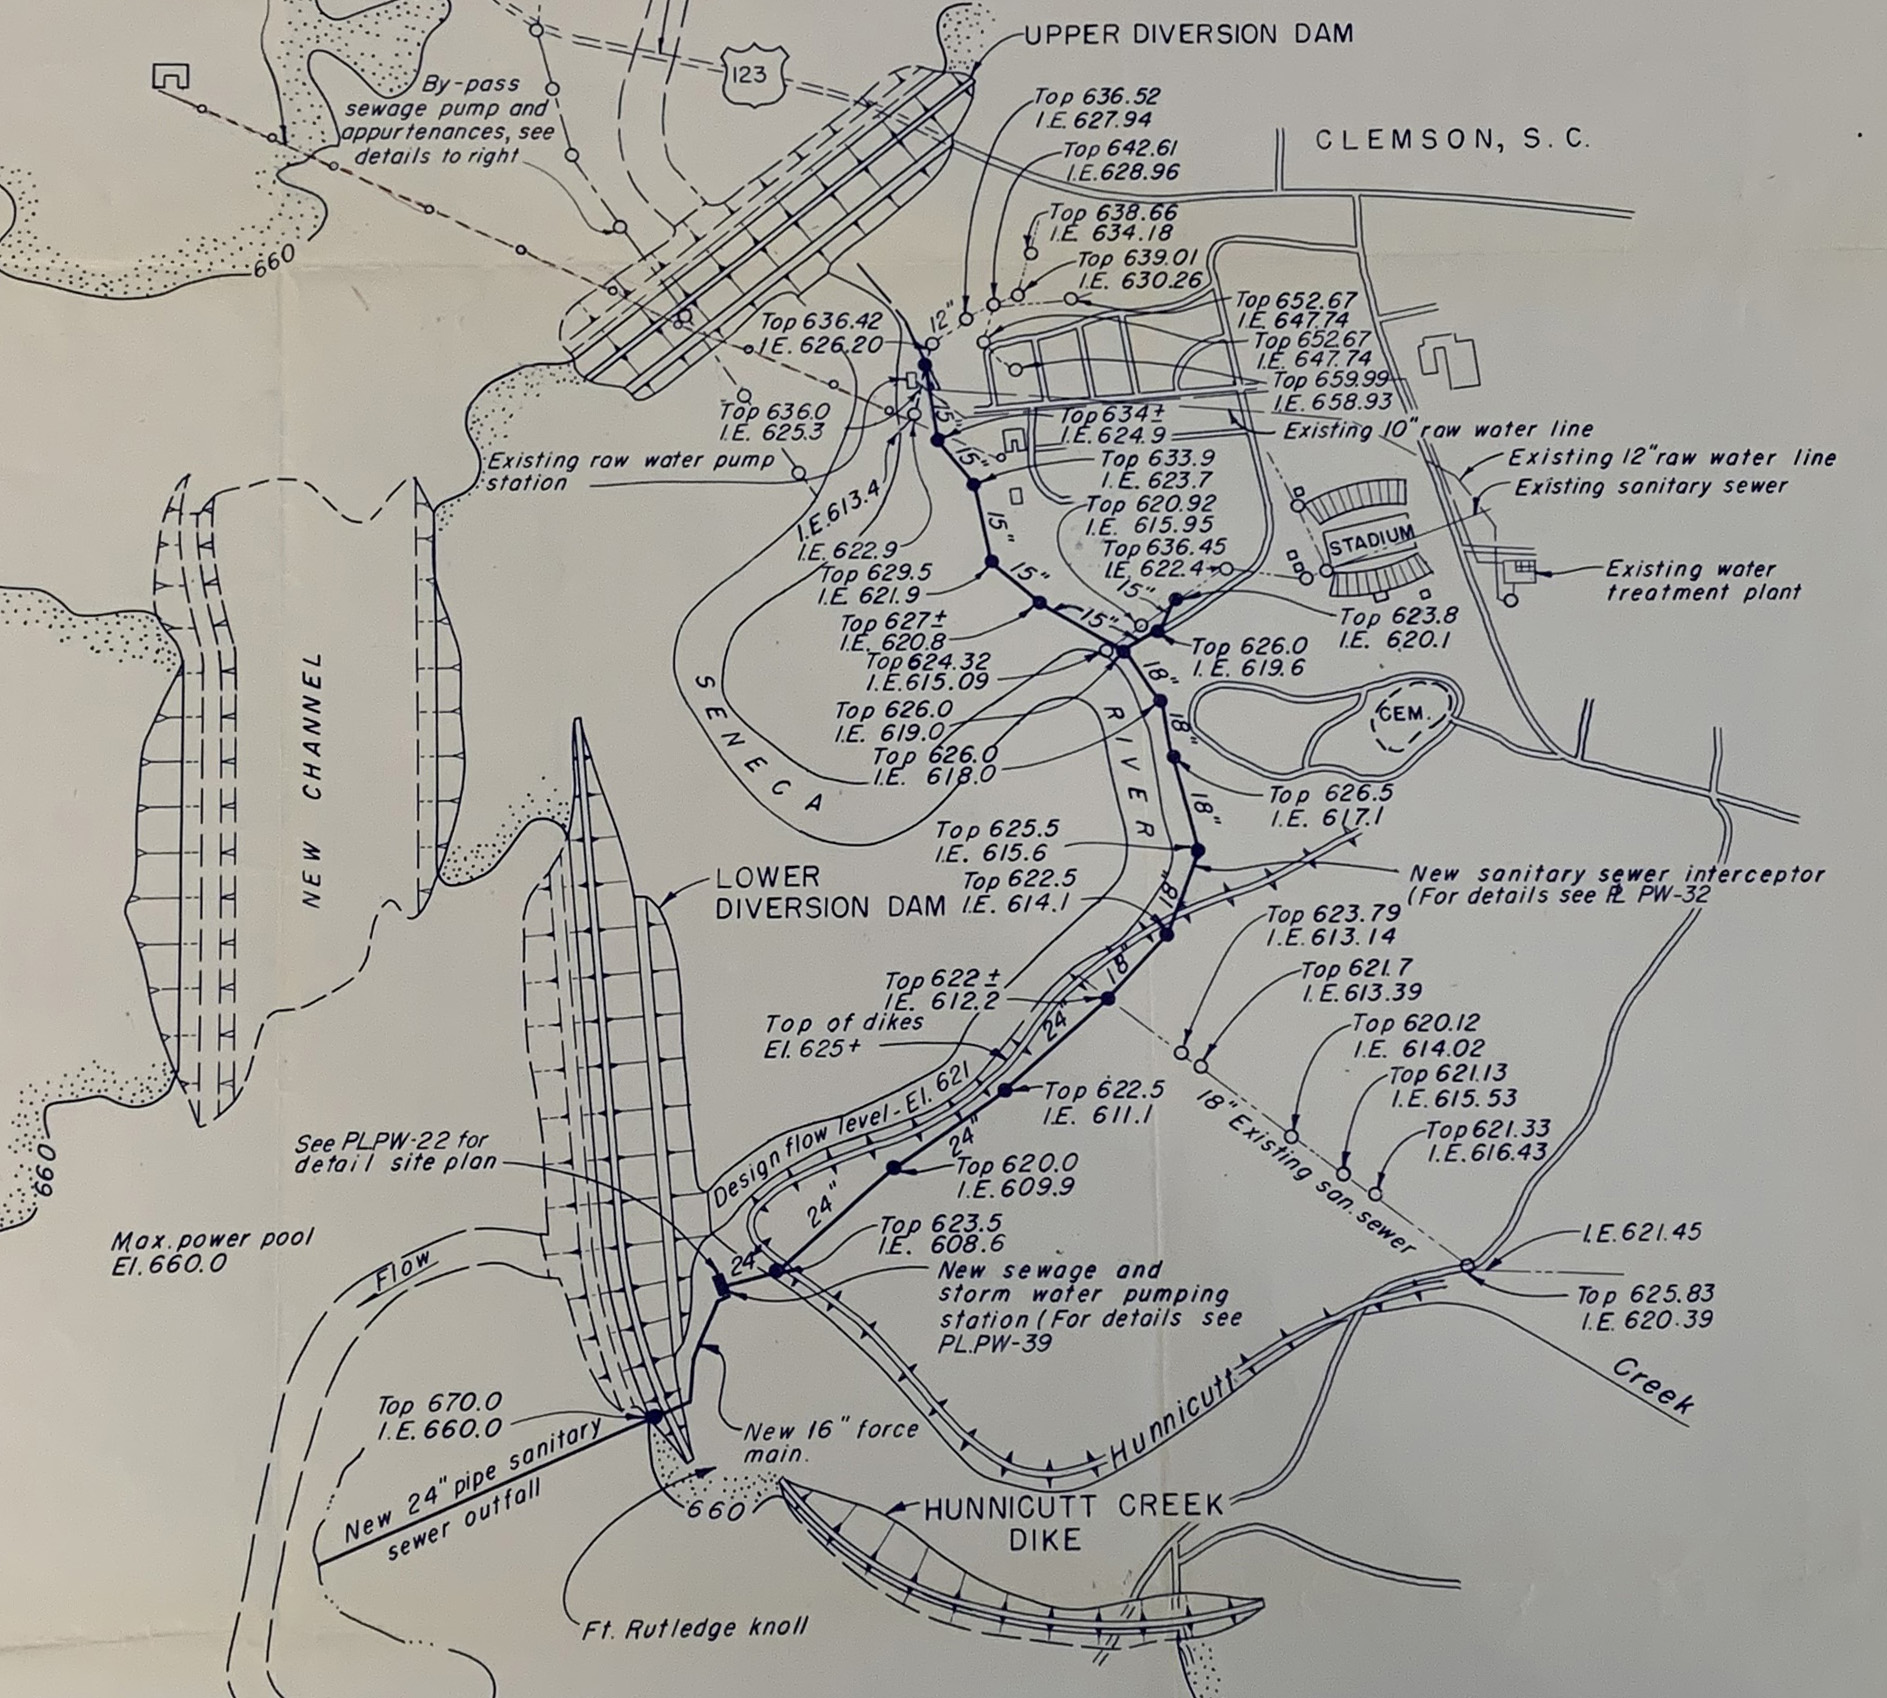 Site plan for the dikes on campus in 1960.